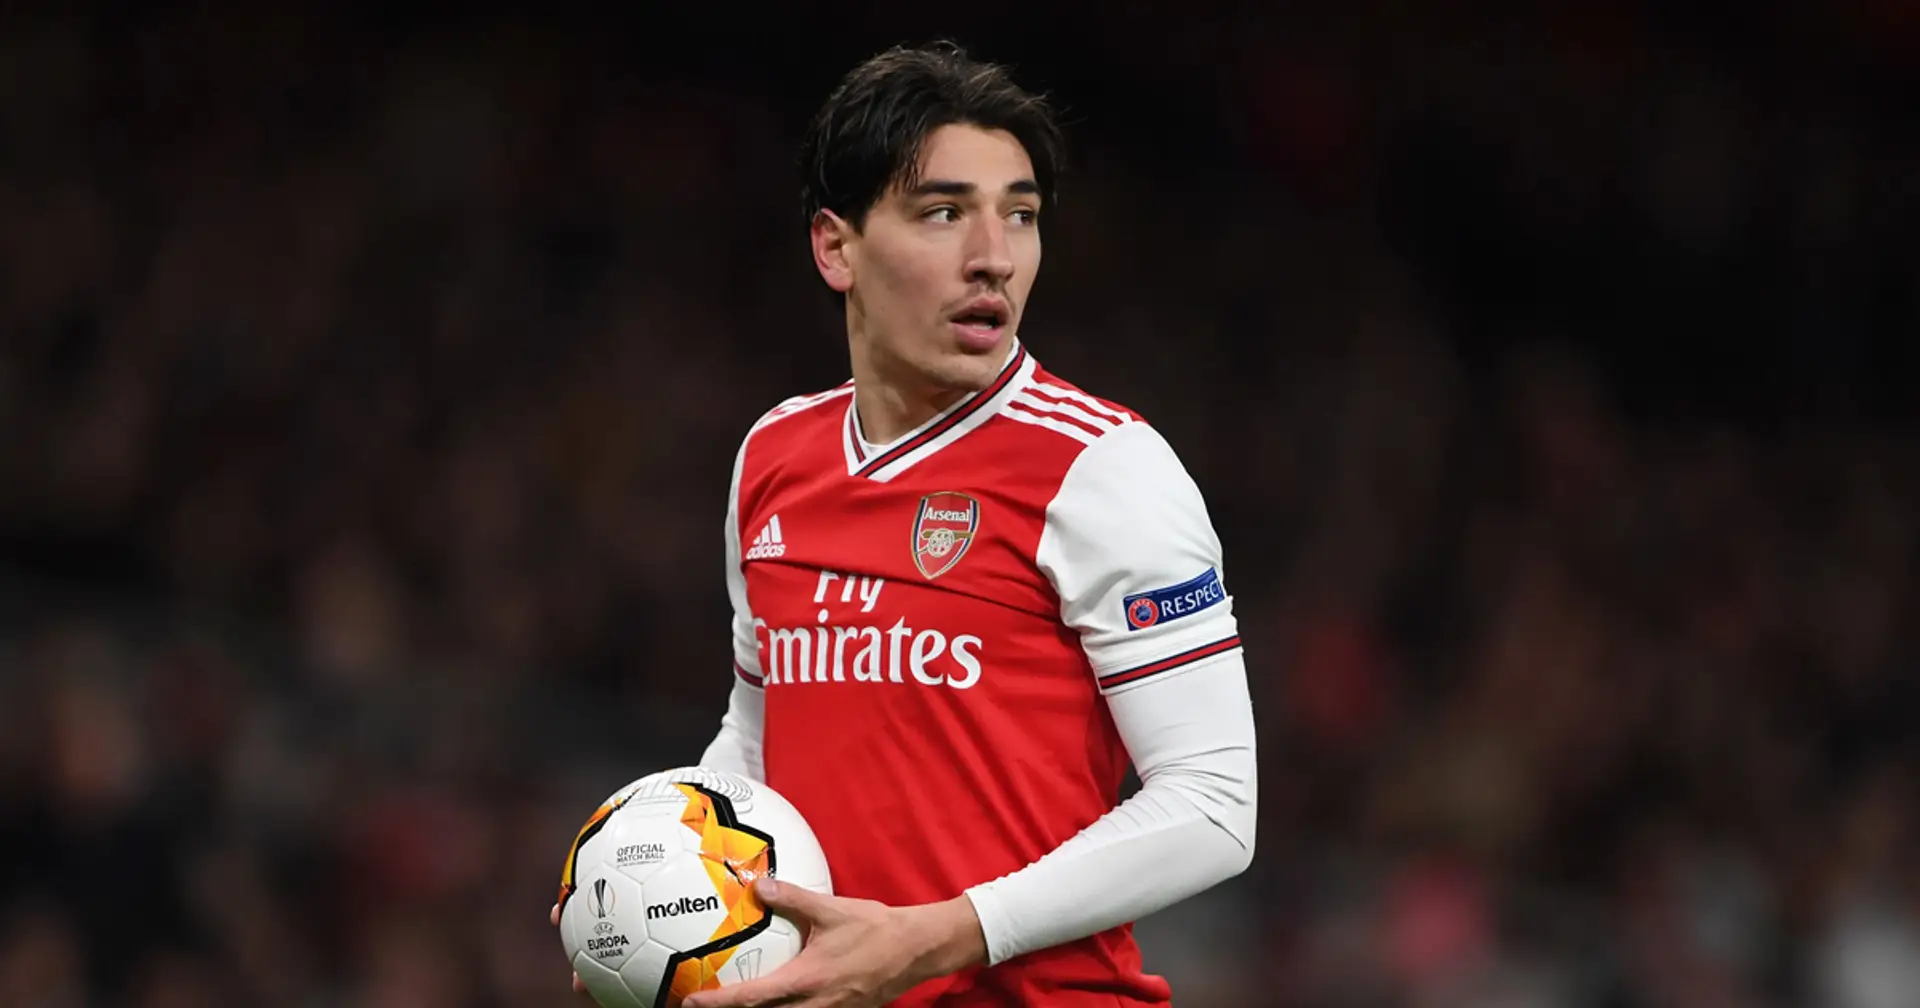 PSG reportedly interested in Bellerin: PROs and CONs of letting Hector leave